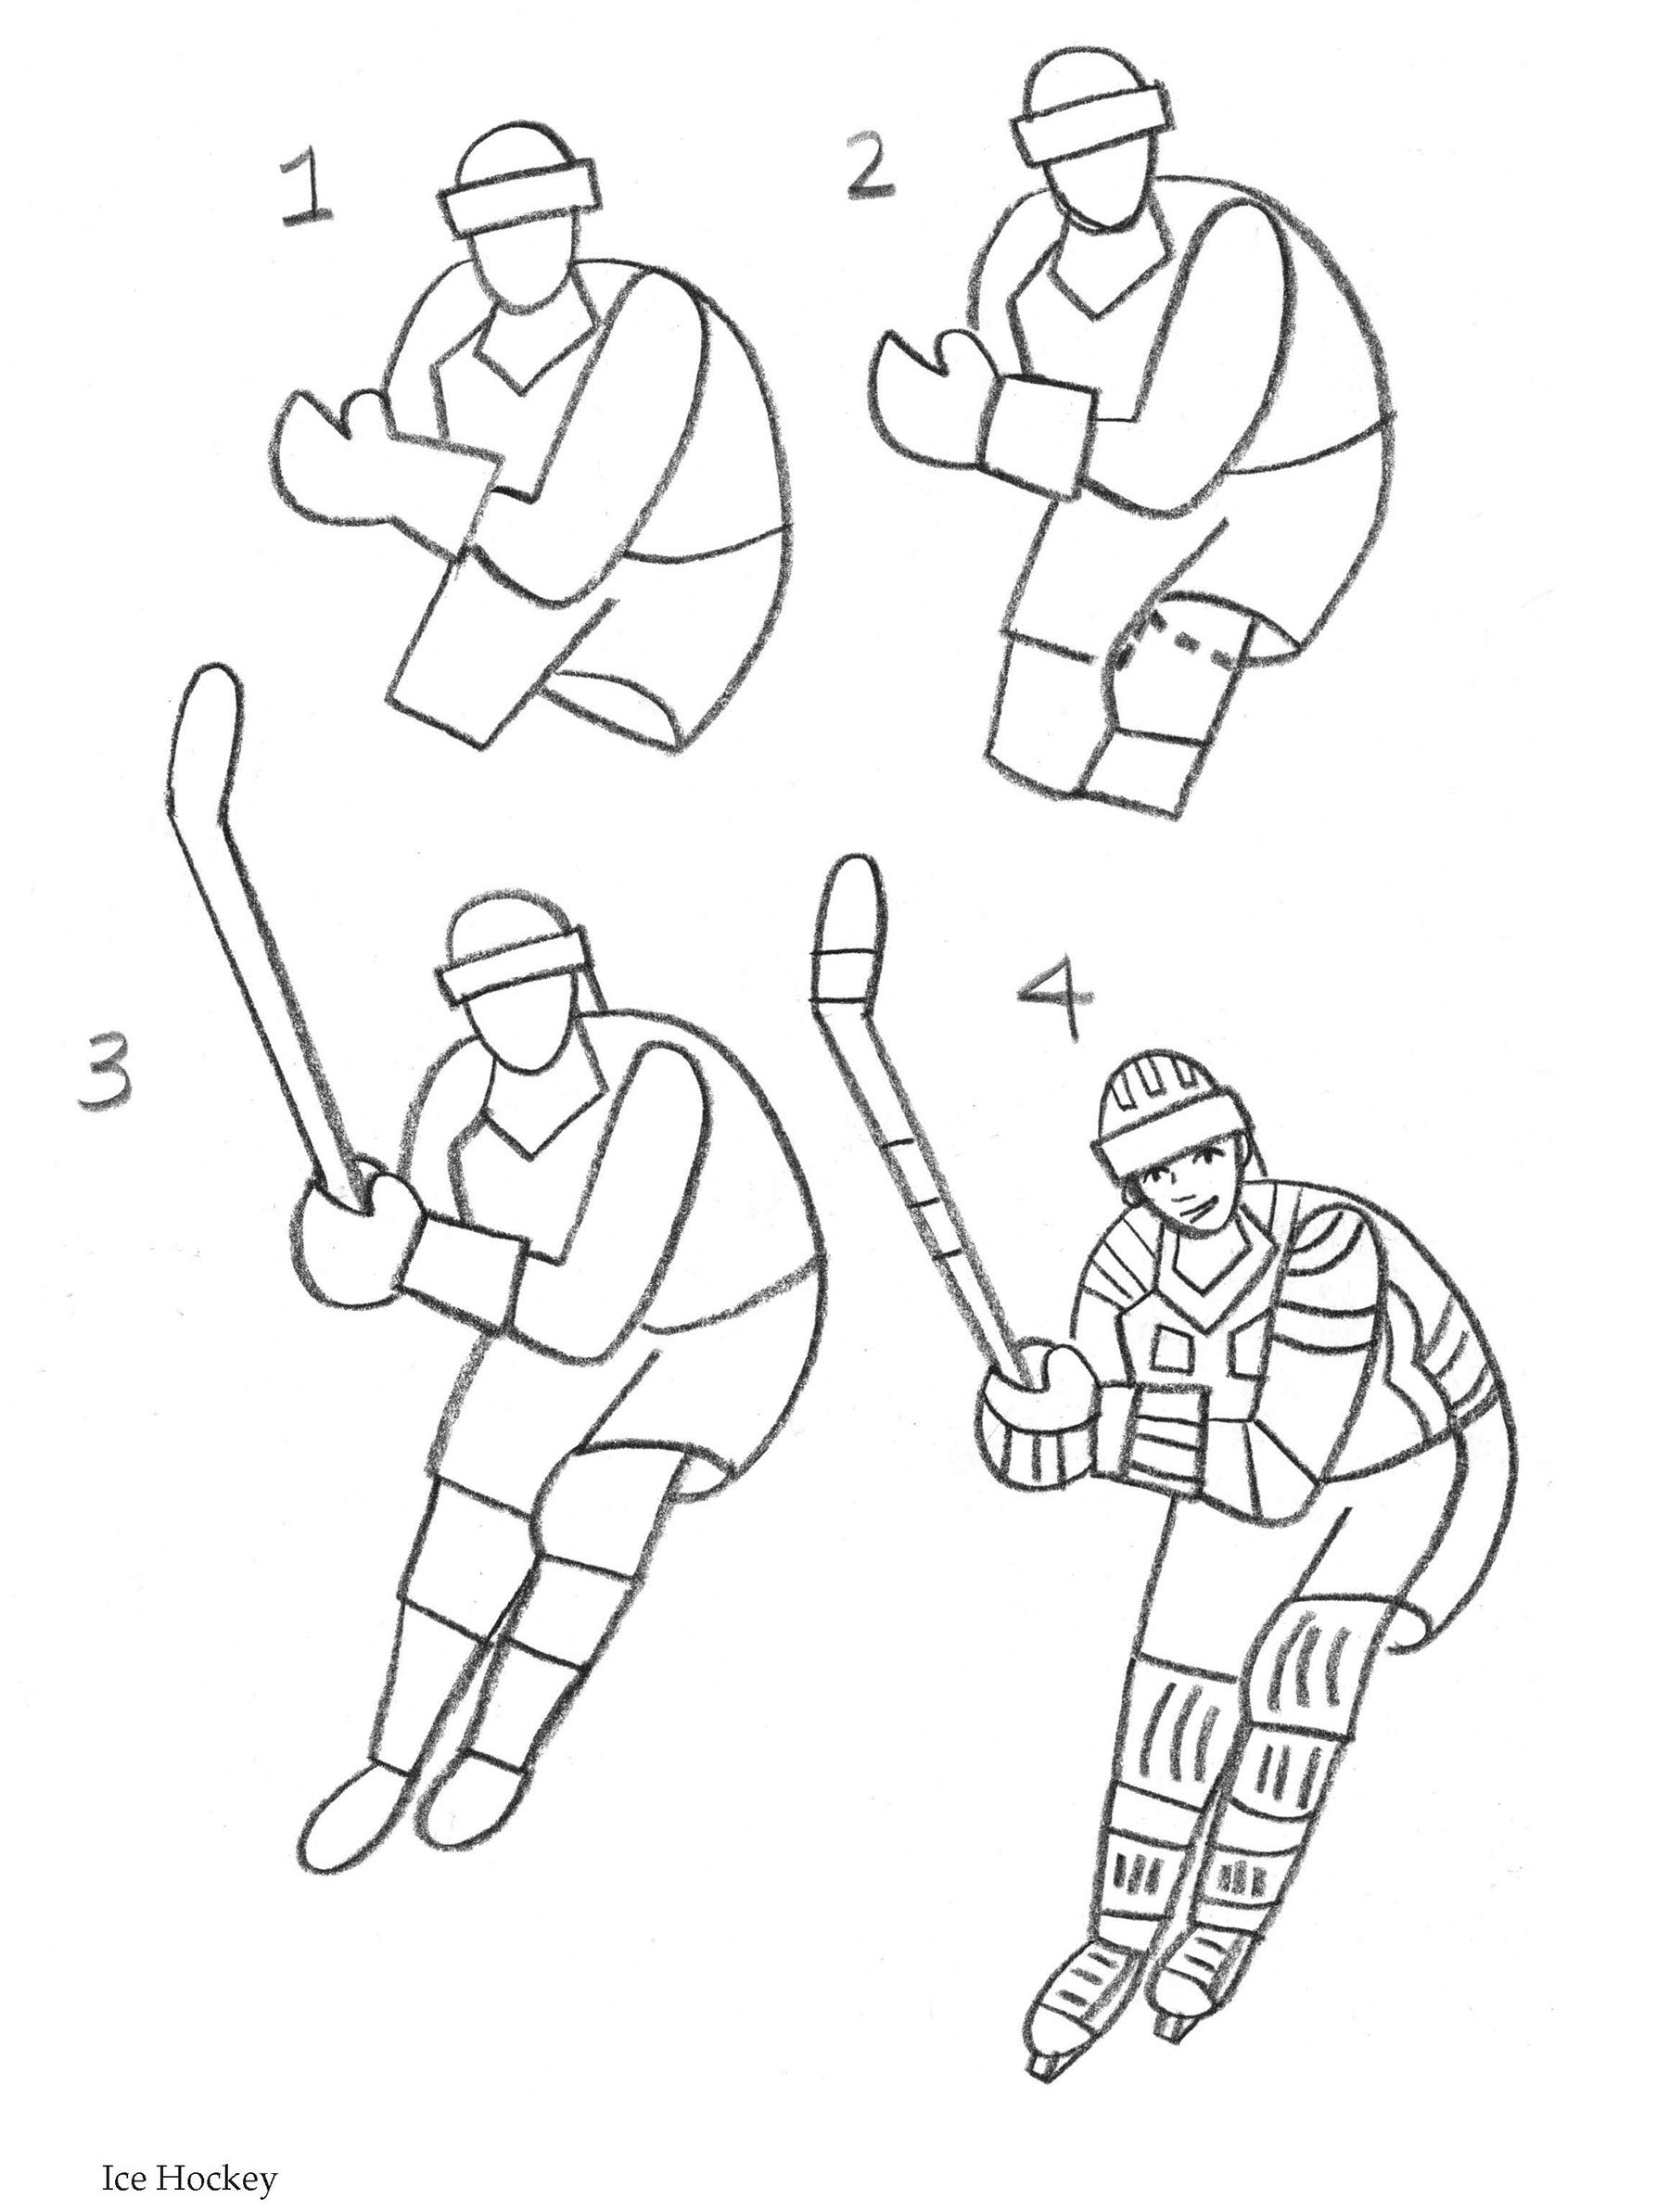 How to Draw Sports (Dover How to Draw)